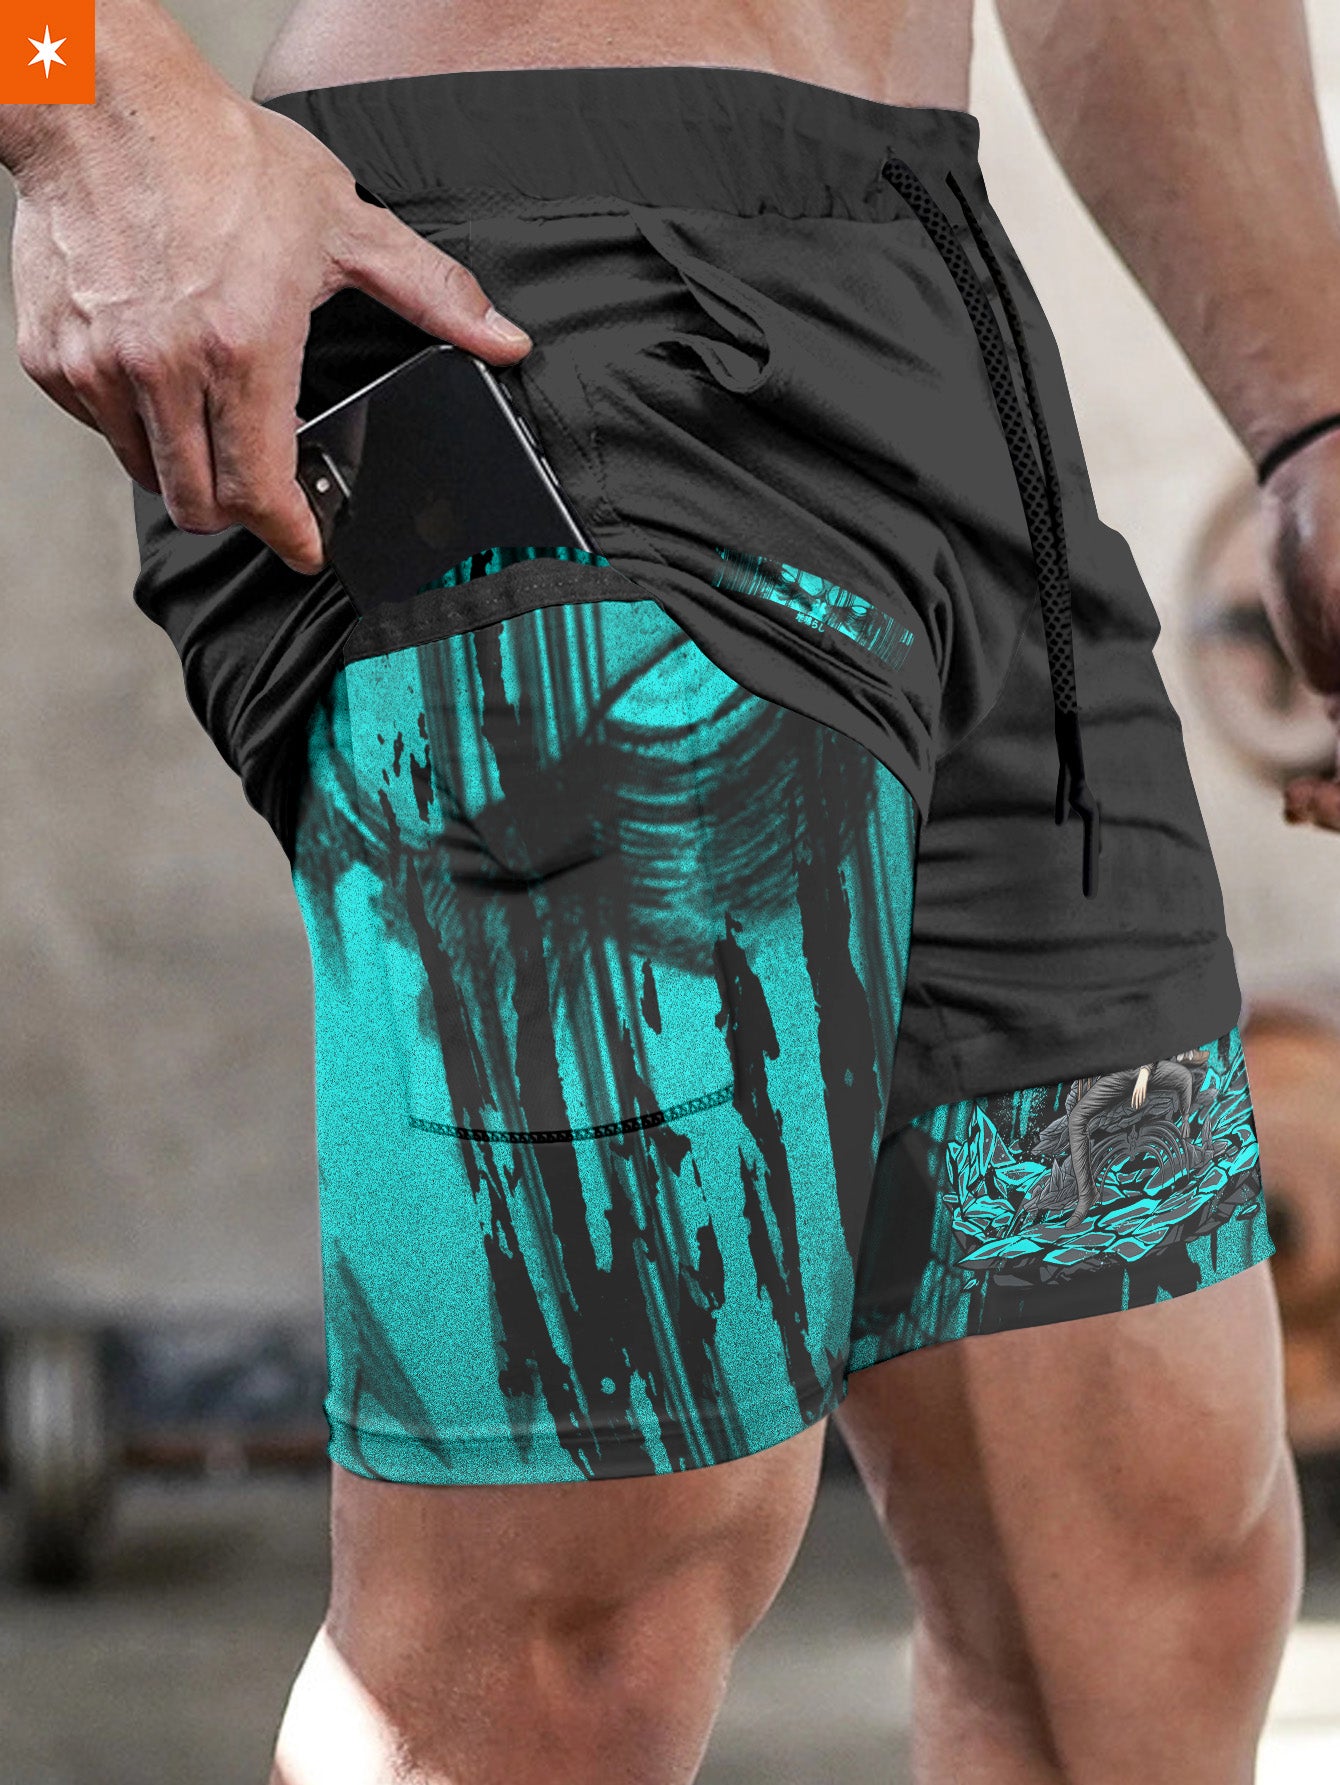 The Rumbling Performance Shorts